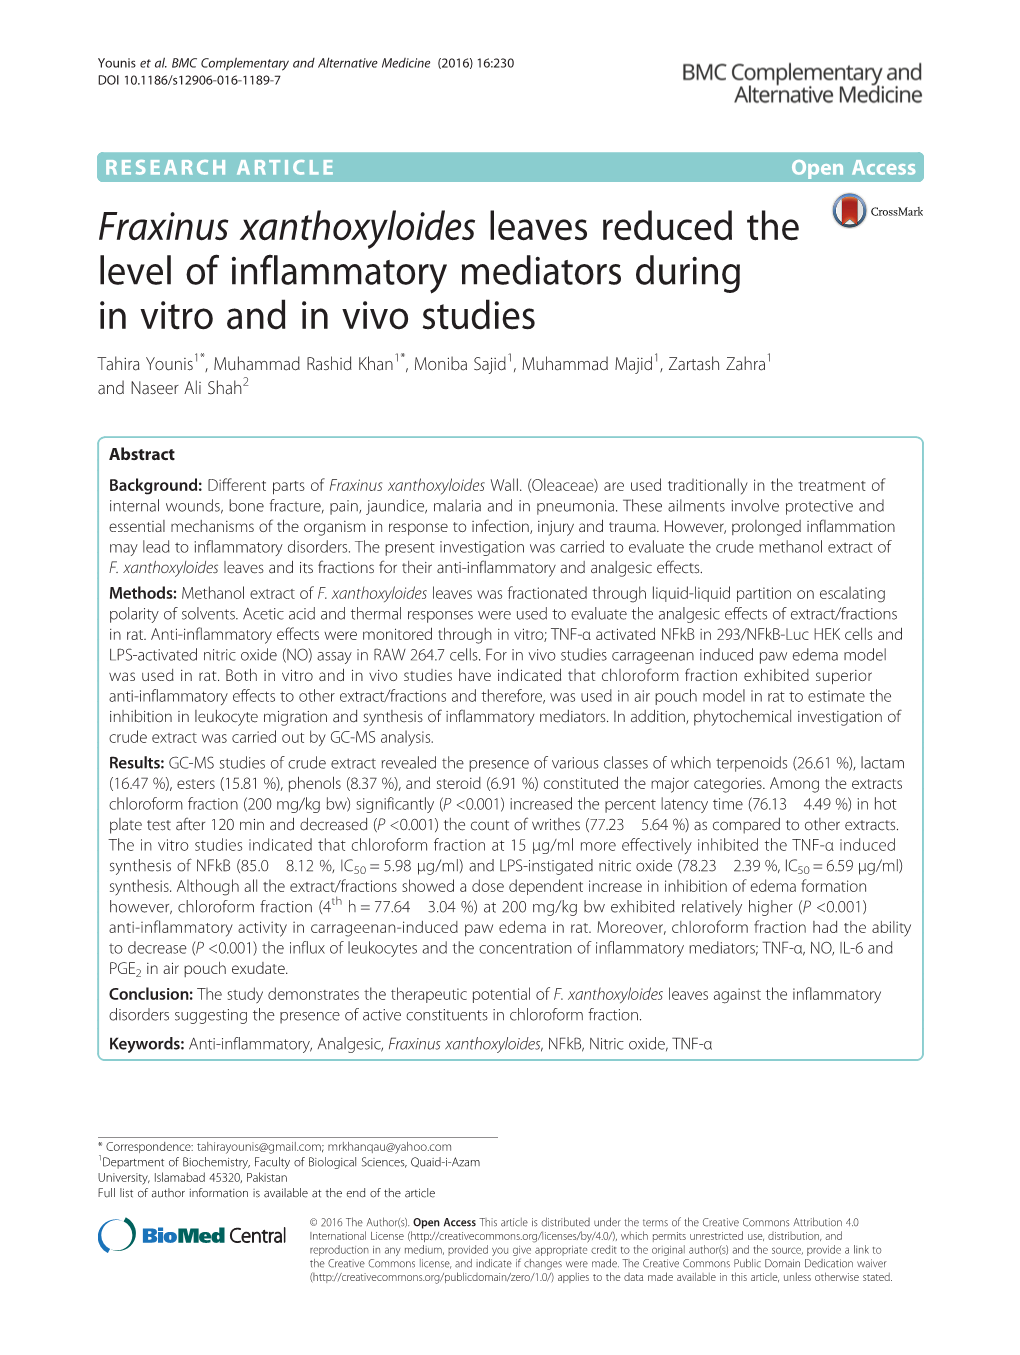 Fraxinus Xanthoxyloides Leaves Reduced the Level of Inflammatory